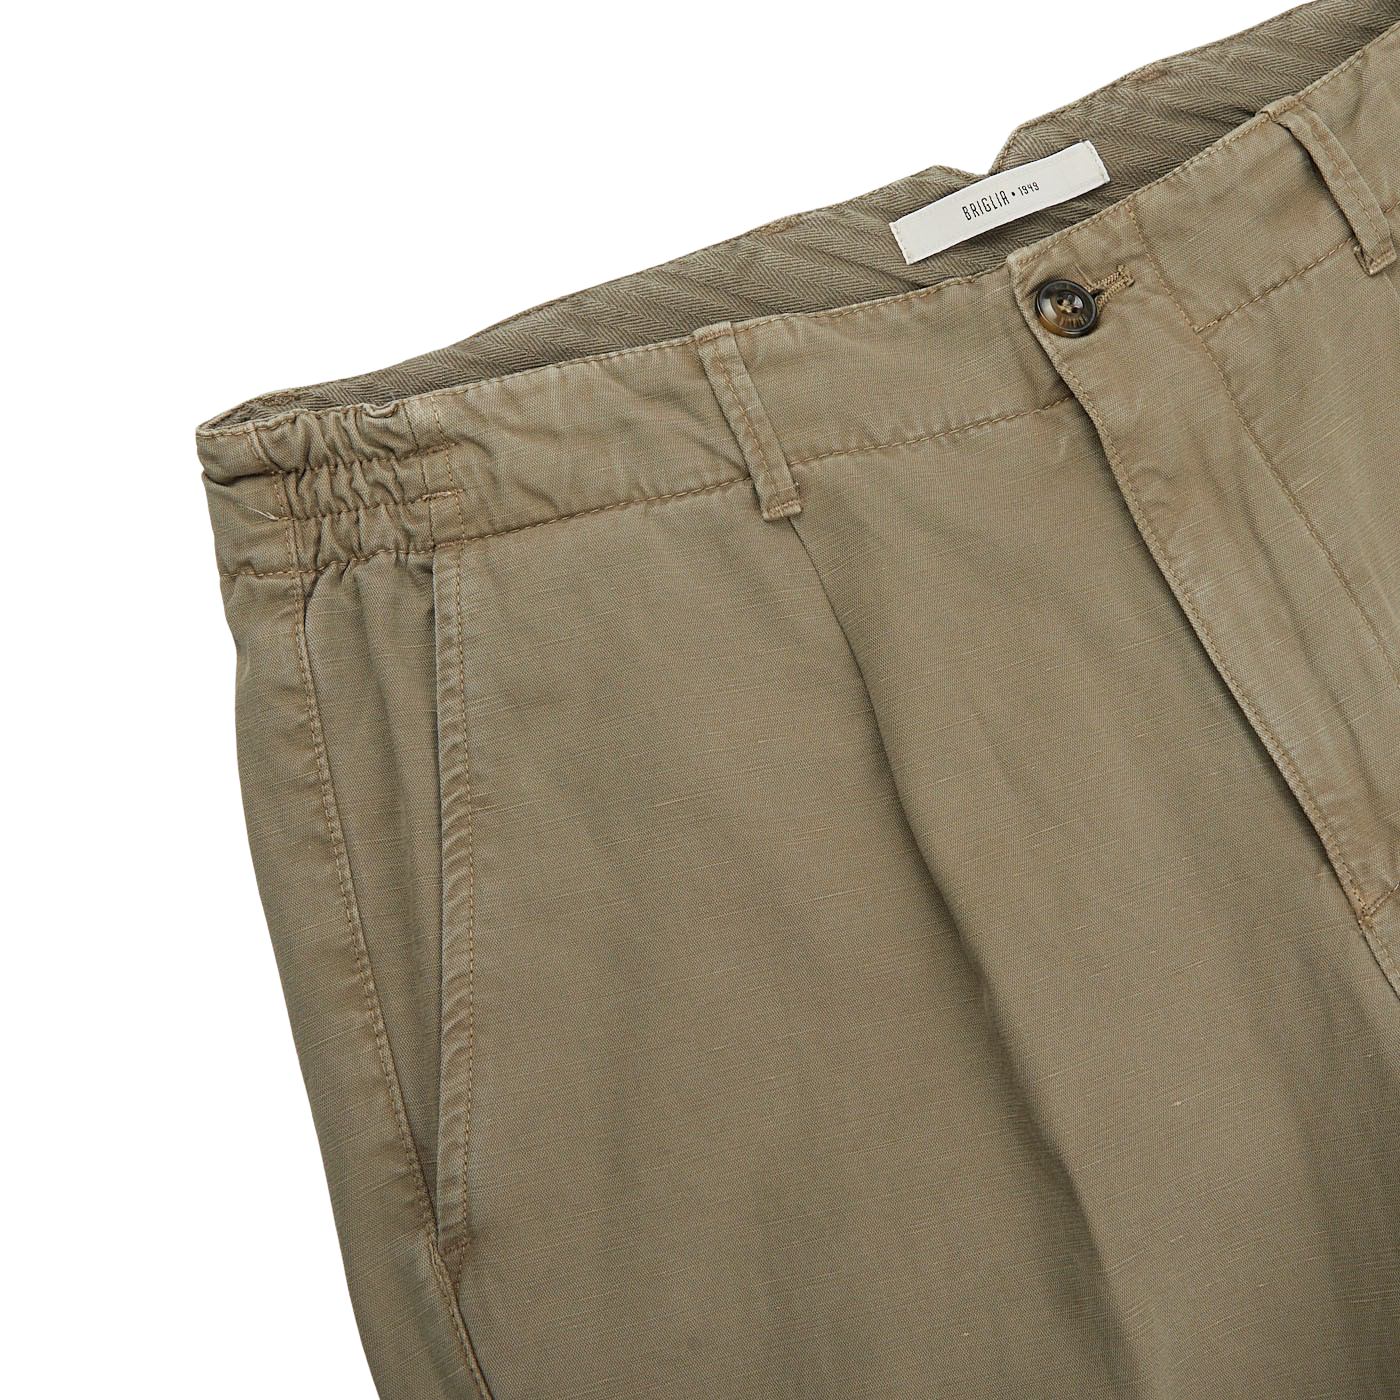 An easy-fit pair of Olive Cotton Linen BG59 Pleated Chinos by Briglia on a white background.